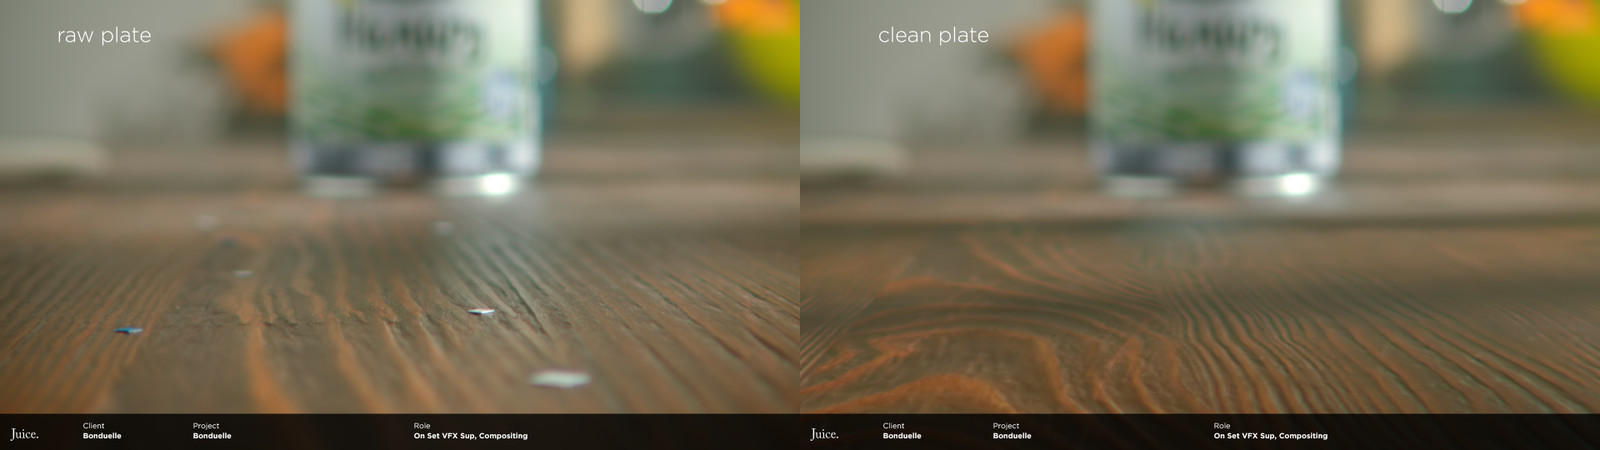 Example clean plate